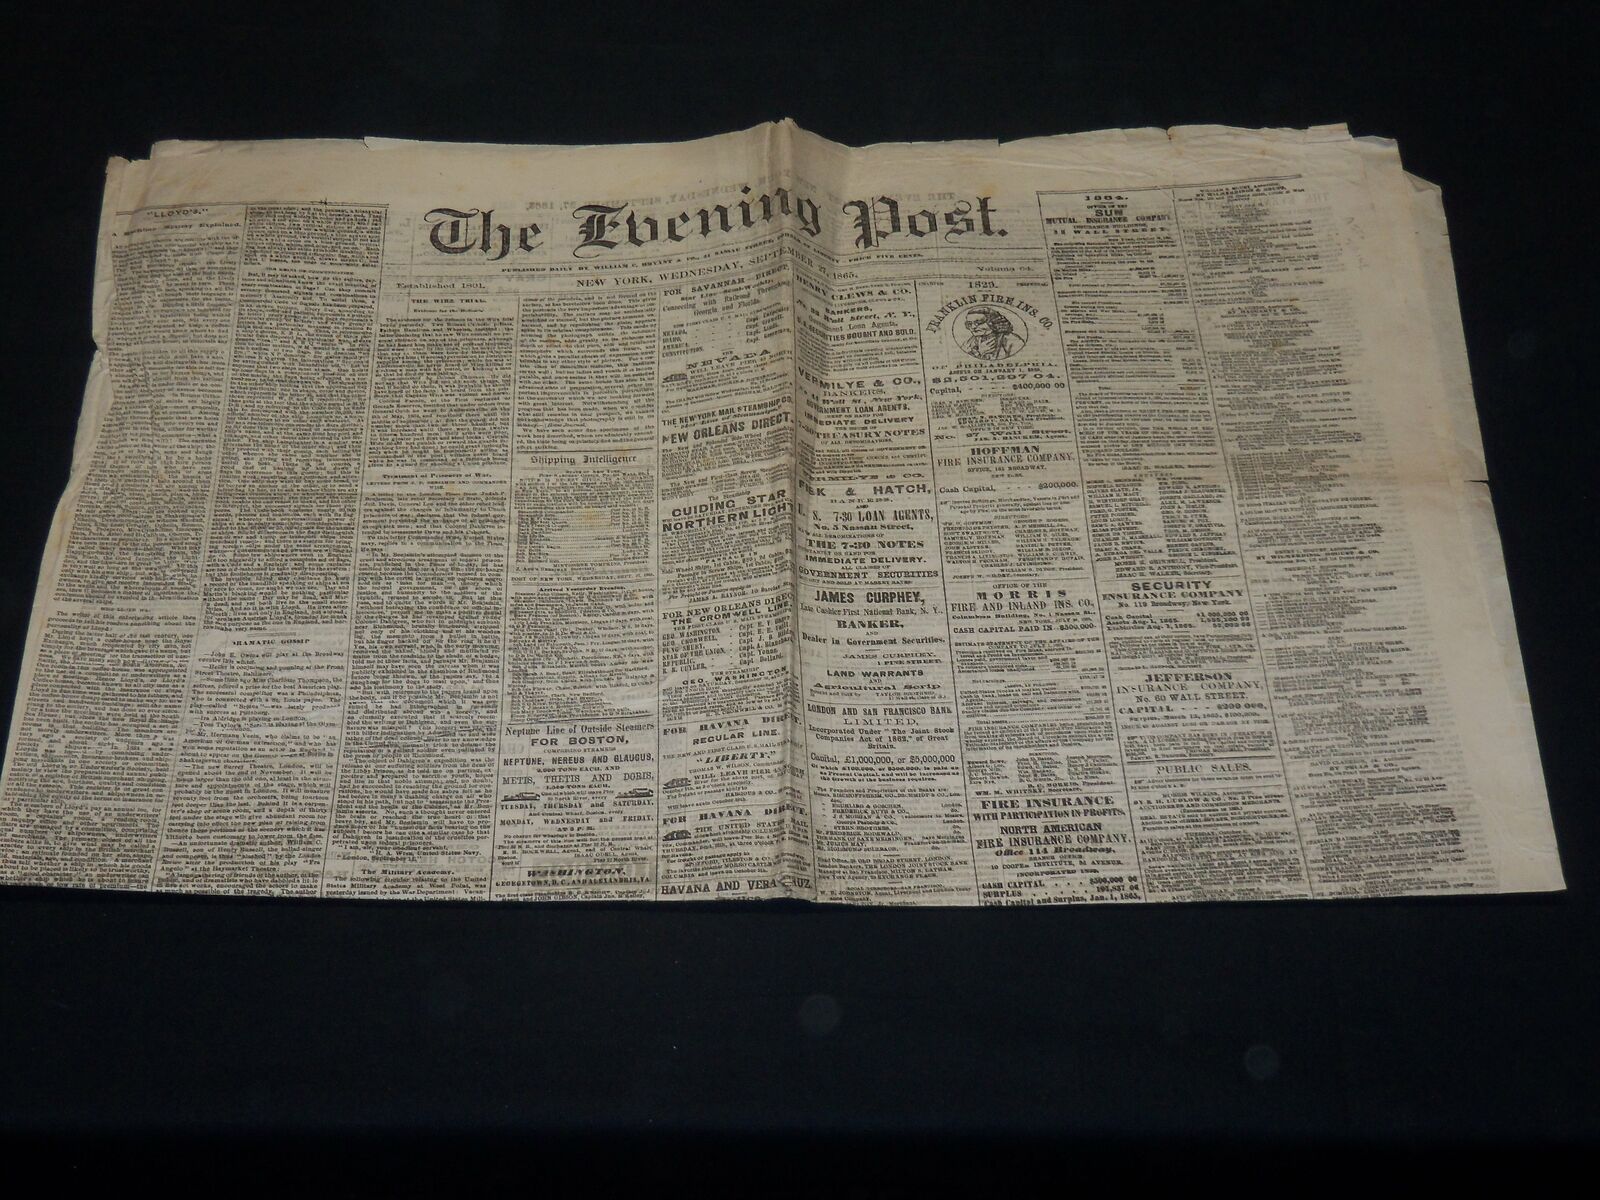 1865 SEPTEMBER 27 THE EVENING POST NEWSPAPER - WIRZ - PRIZE FIGHT - NP 4957